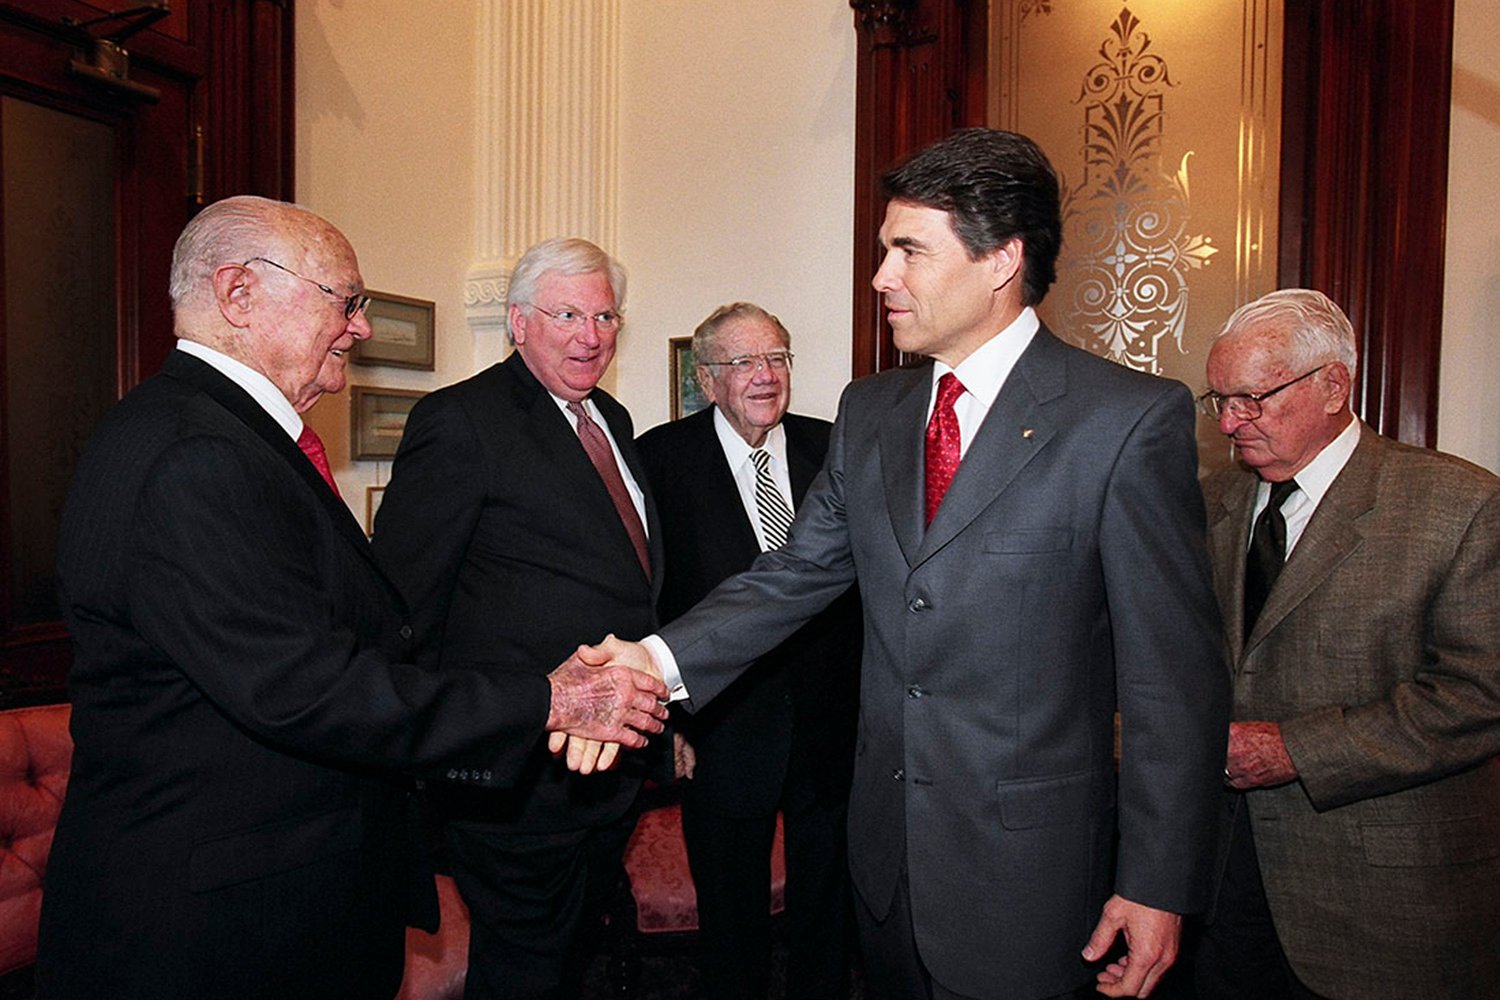 Five Texas governors, photographed together in 2003 (left to right): Preston Smith, Mark White, Dolph Briscoe, Rick Perry and Bill Clements. 